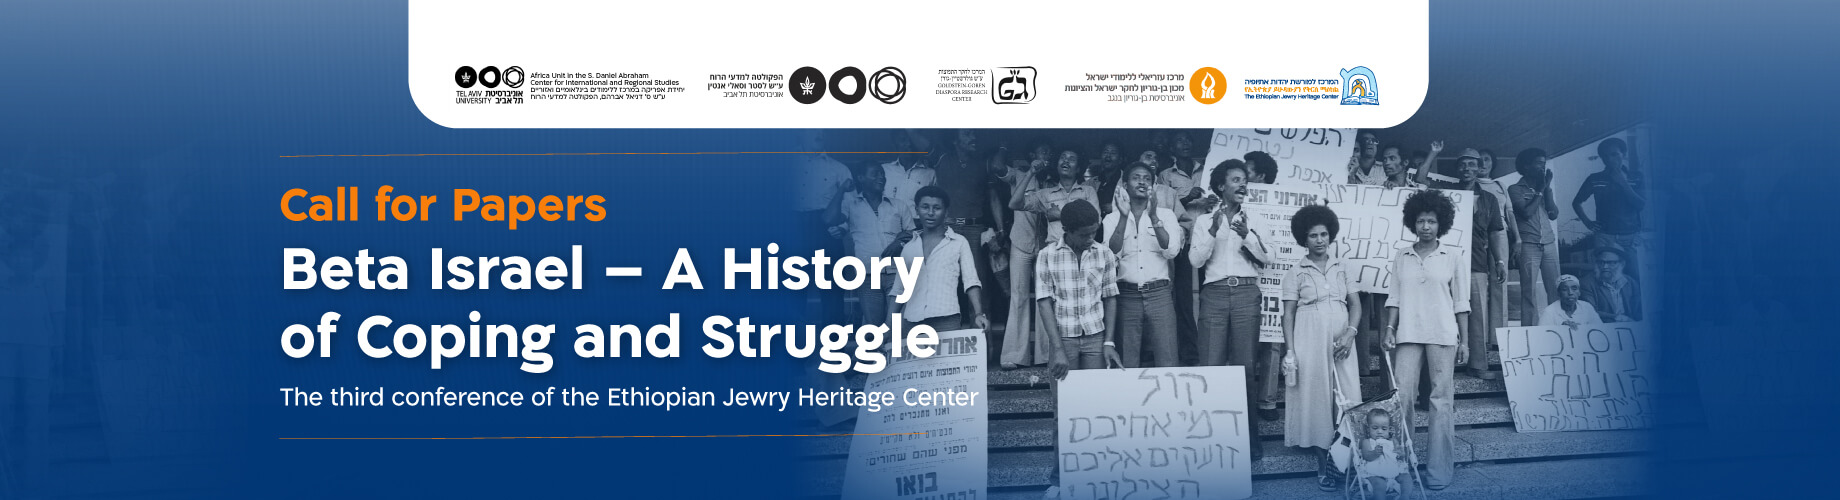 Call for Papers Beta Israel – A History of Coping and Struggle